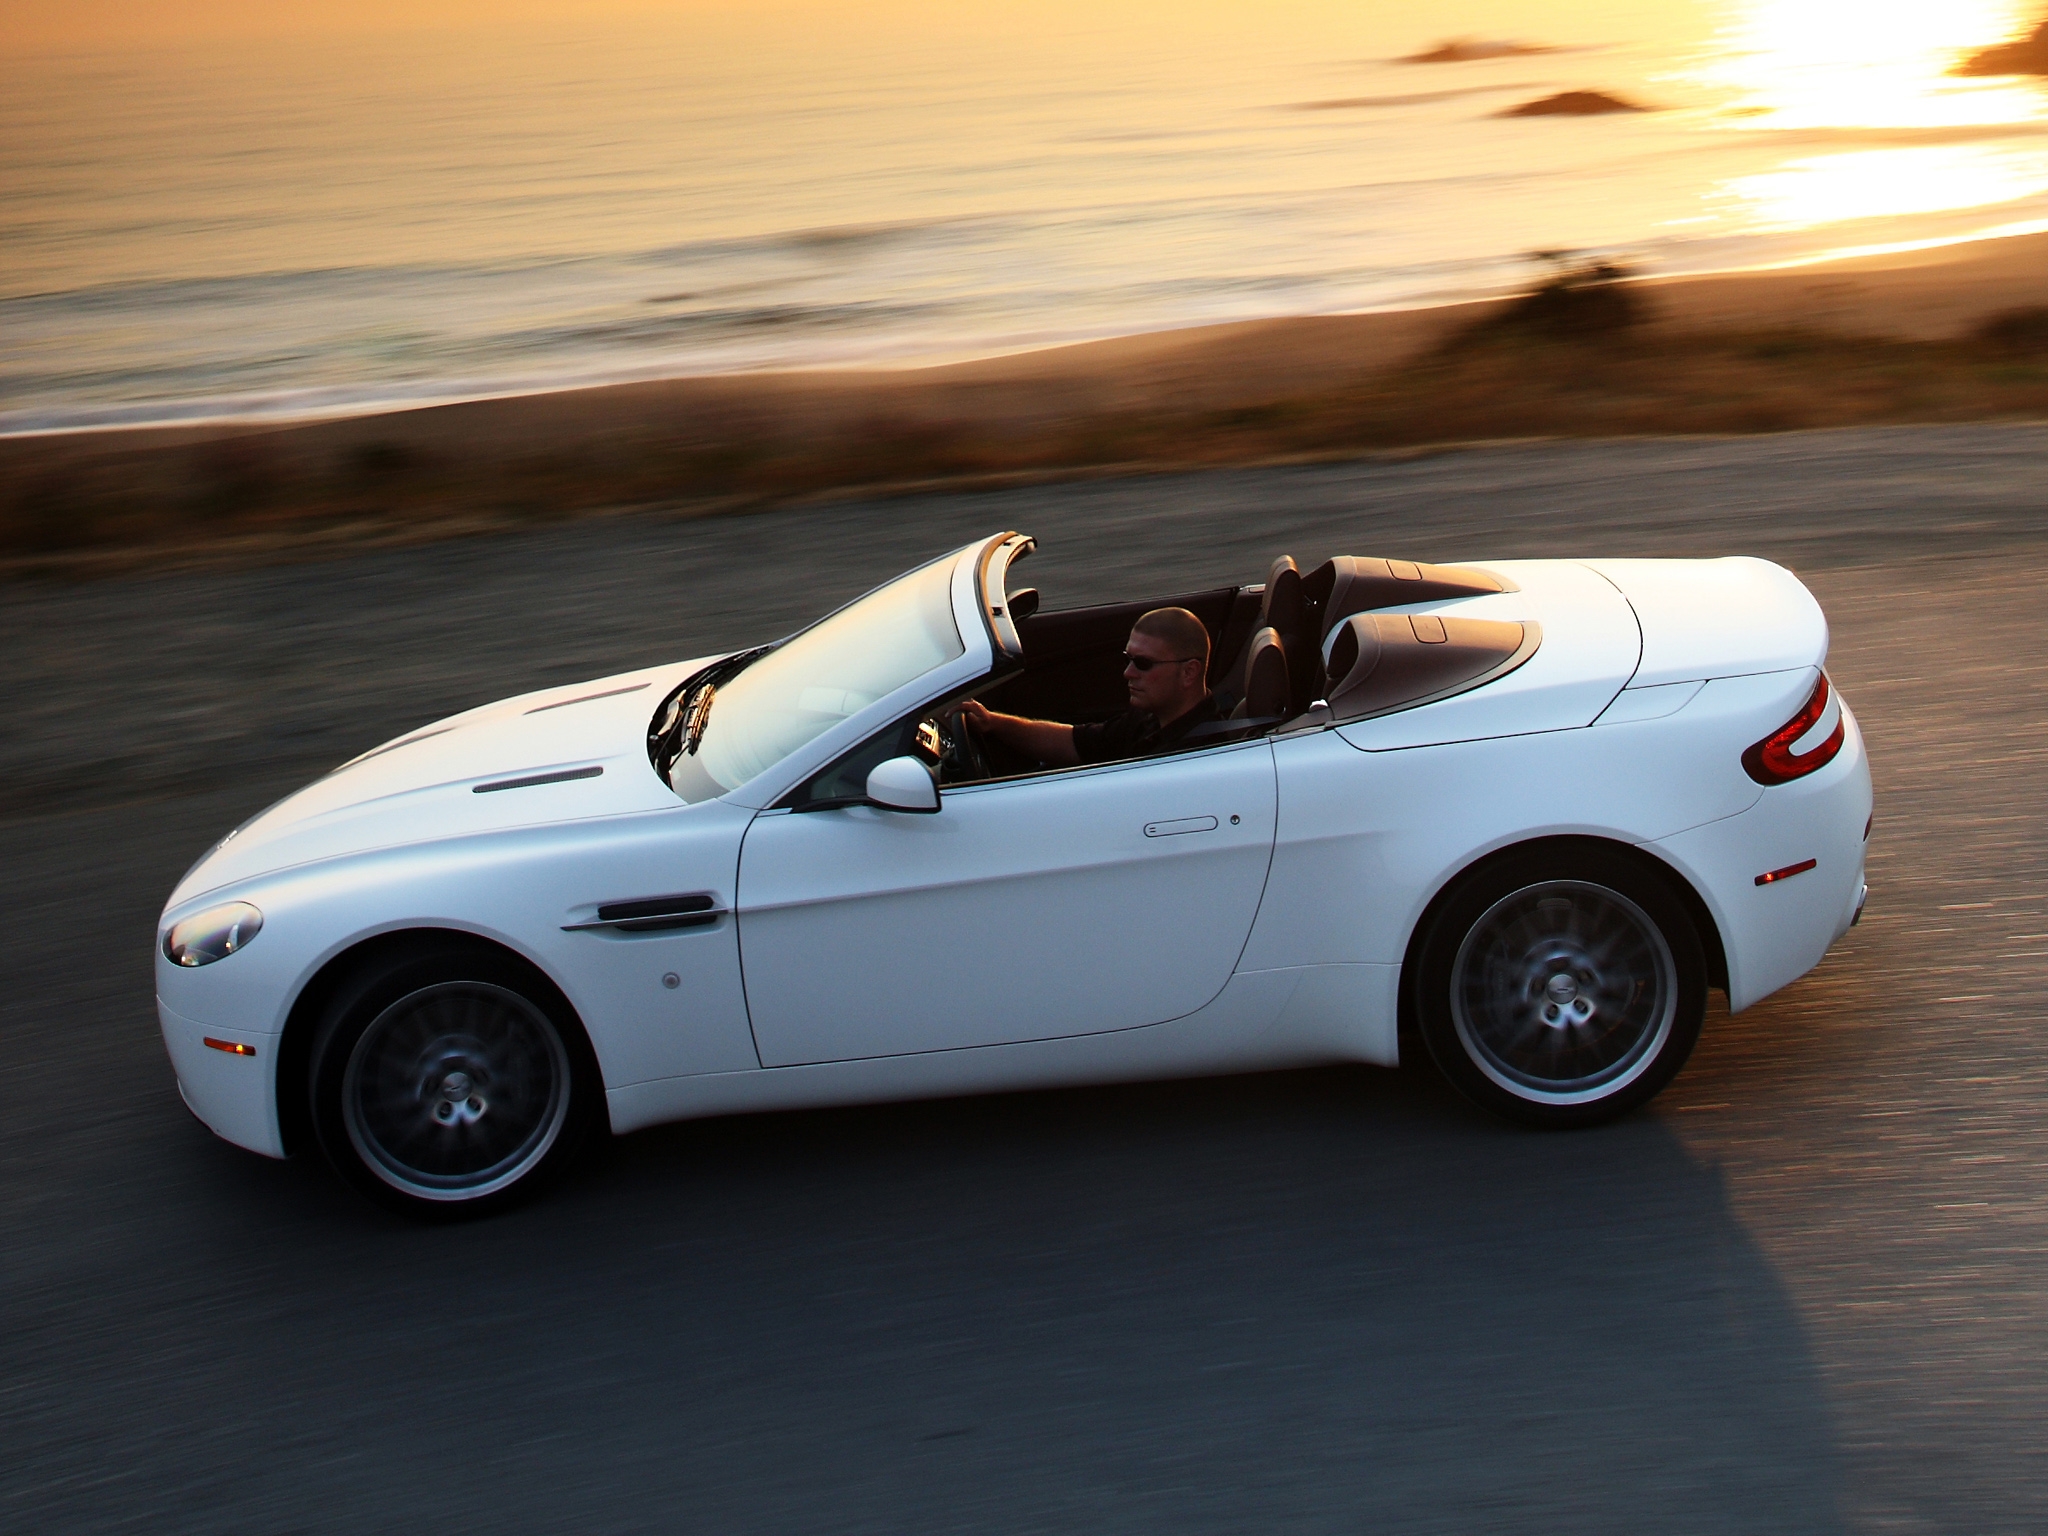 aston martin, cars, white, side view, speed, cabriolet, 2008, v8, vantage Full HD